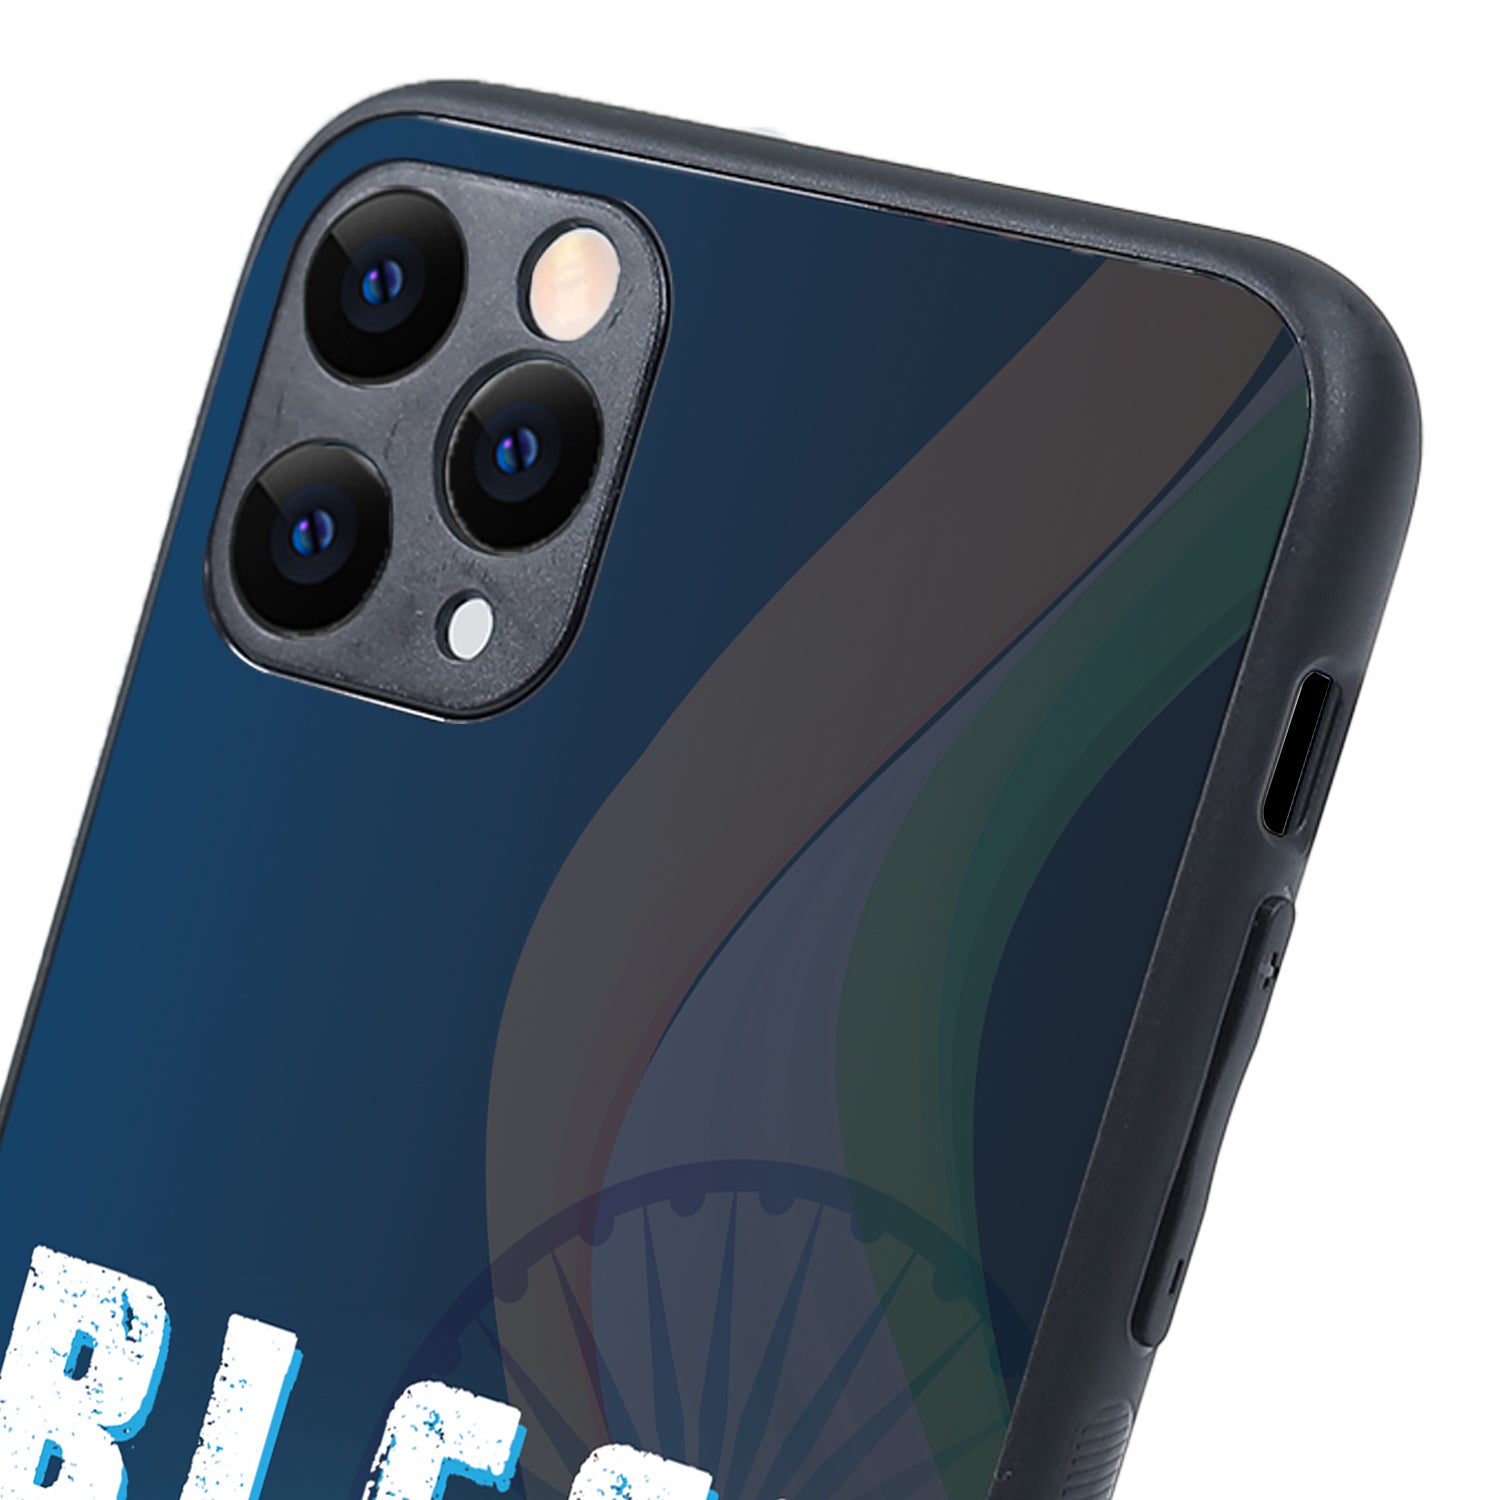 Bleed Blue Sports iPhone 11 Pro Max Case